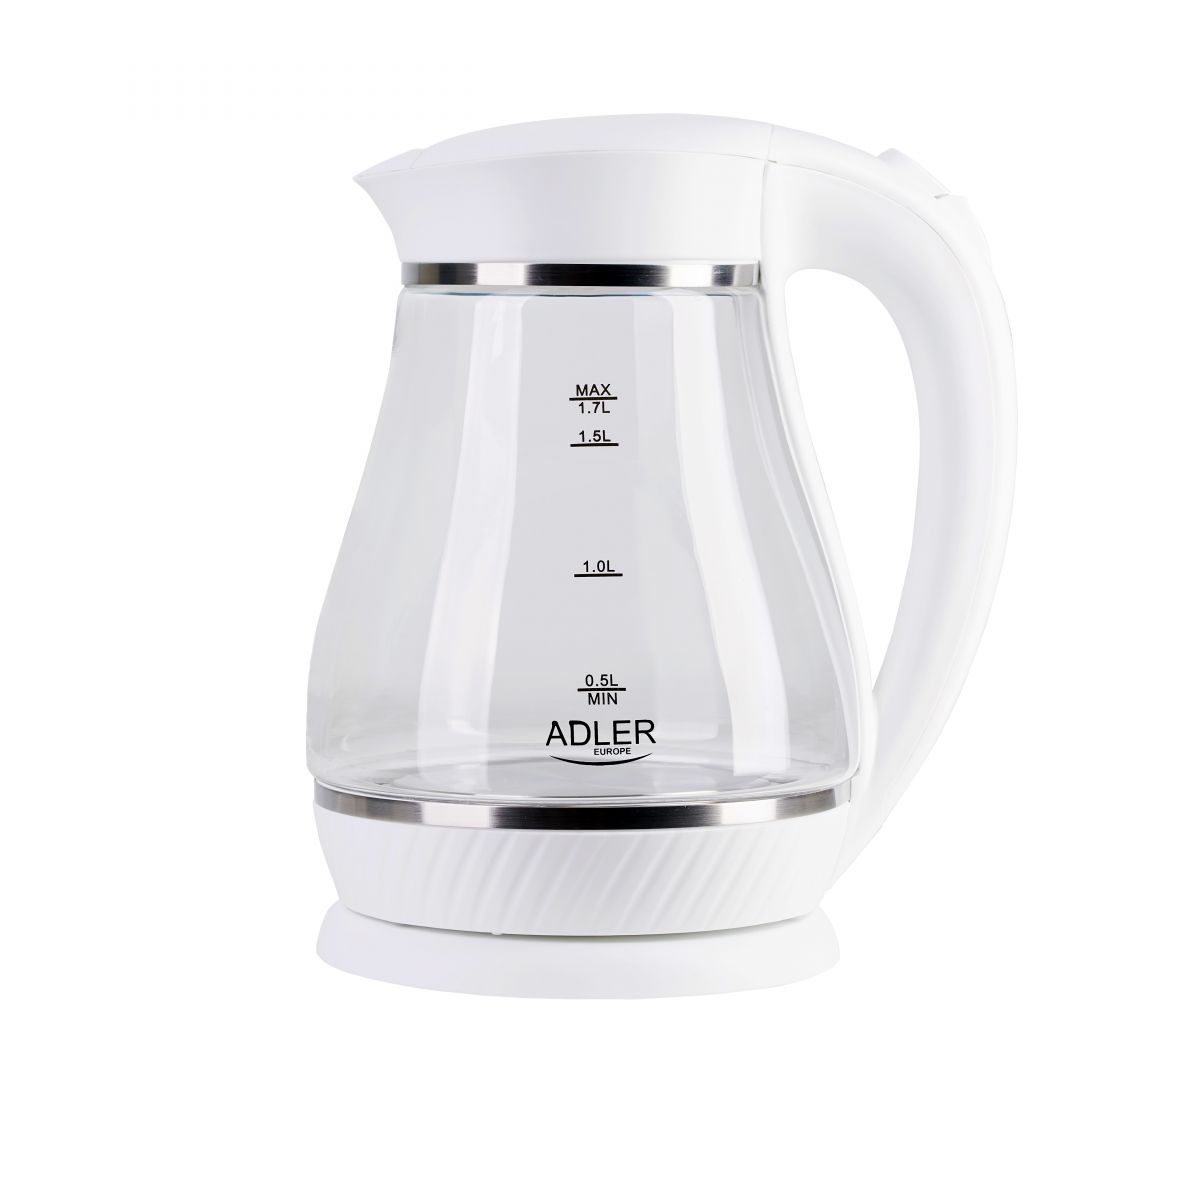 Adler AD 1274 white Kettle glass electric 1,7L